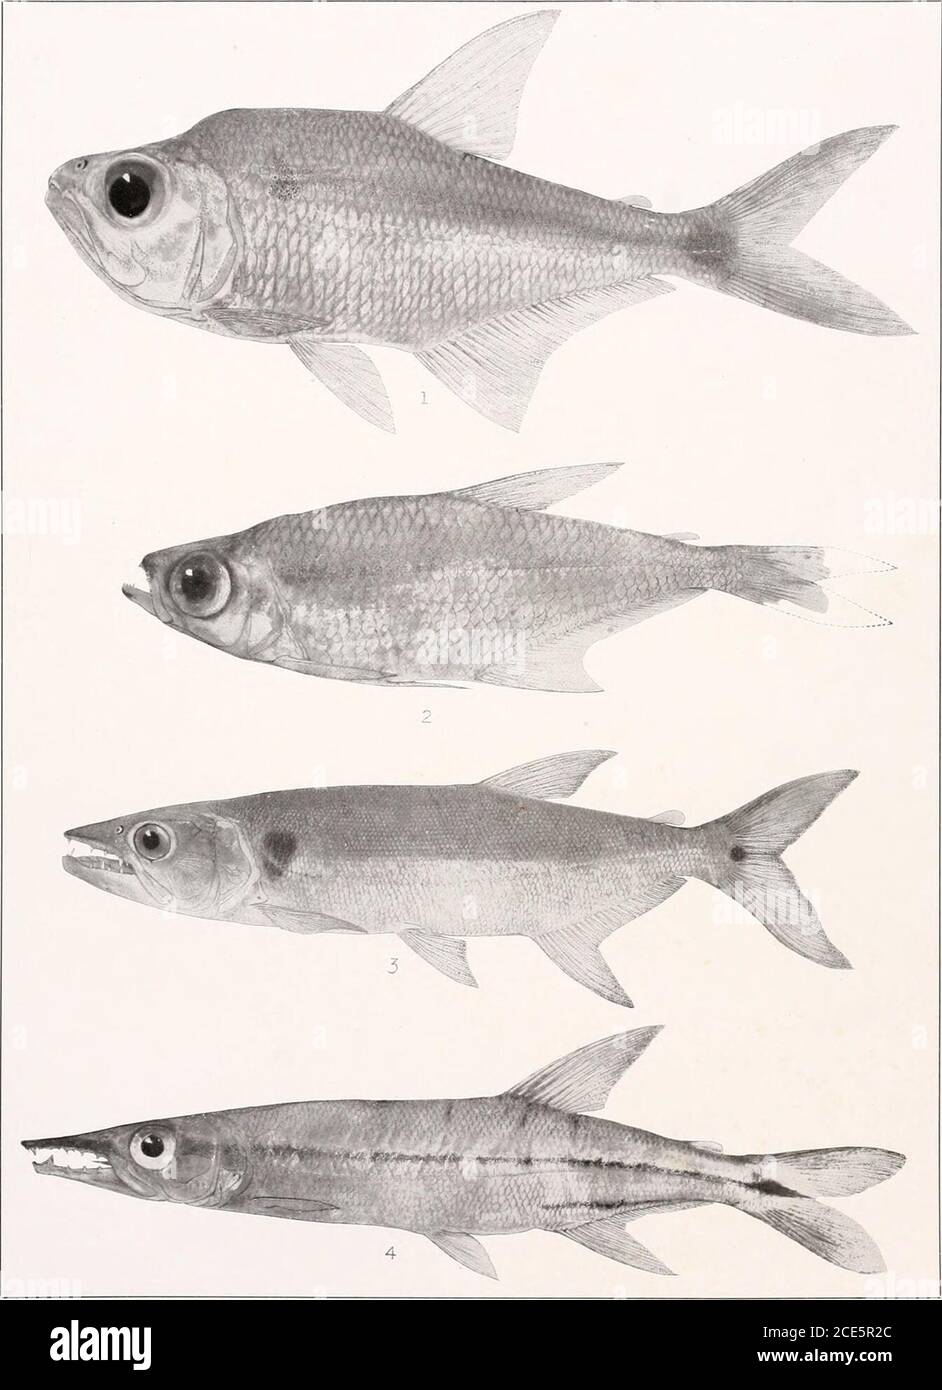 . The freshwater fishes of British Guiana, including a study of the ecological grouping of species and the relation of the fauna of the plateau to that of the lowlands . m 1. Exodon paradoxus Mcller and Troschel. 75 mm.(Type.) 104mm. No.2149. 3. Charaxgibbosus(Linnaeus).grammus Eigenmann. (Type.) 27 mm. No. 2137. No. 2145. 2. Rceboides thurni Eigenmann.87 mm. No. 2130. 4. Asiphonichlhys henii- Memoirs Carnegie Museum, Vol. V. Plate lxi.. 1. AcanthocharaxmicrolepisEigenmann. (Type.) 105mm. No.2138. 2. HeterockaraxmacrolepisEiGES-mann. (Type 46 mm. o.2142. 3. Acestrarhynchus falcatus(Bi/OCH). L Stock Photo